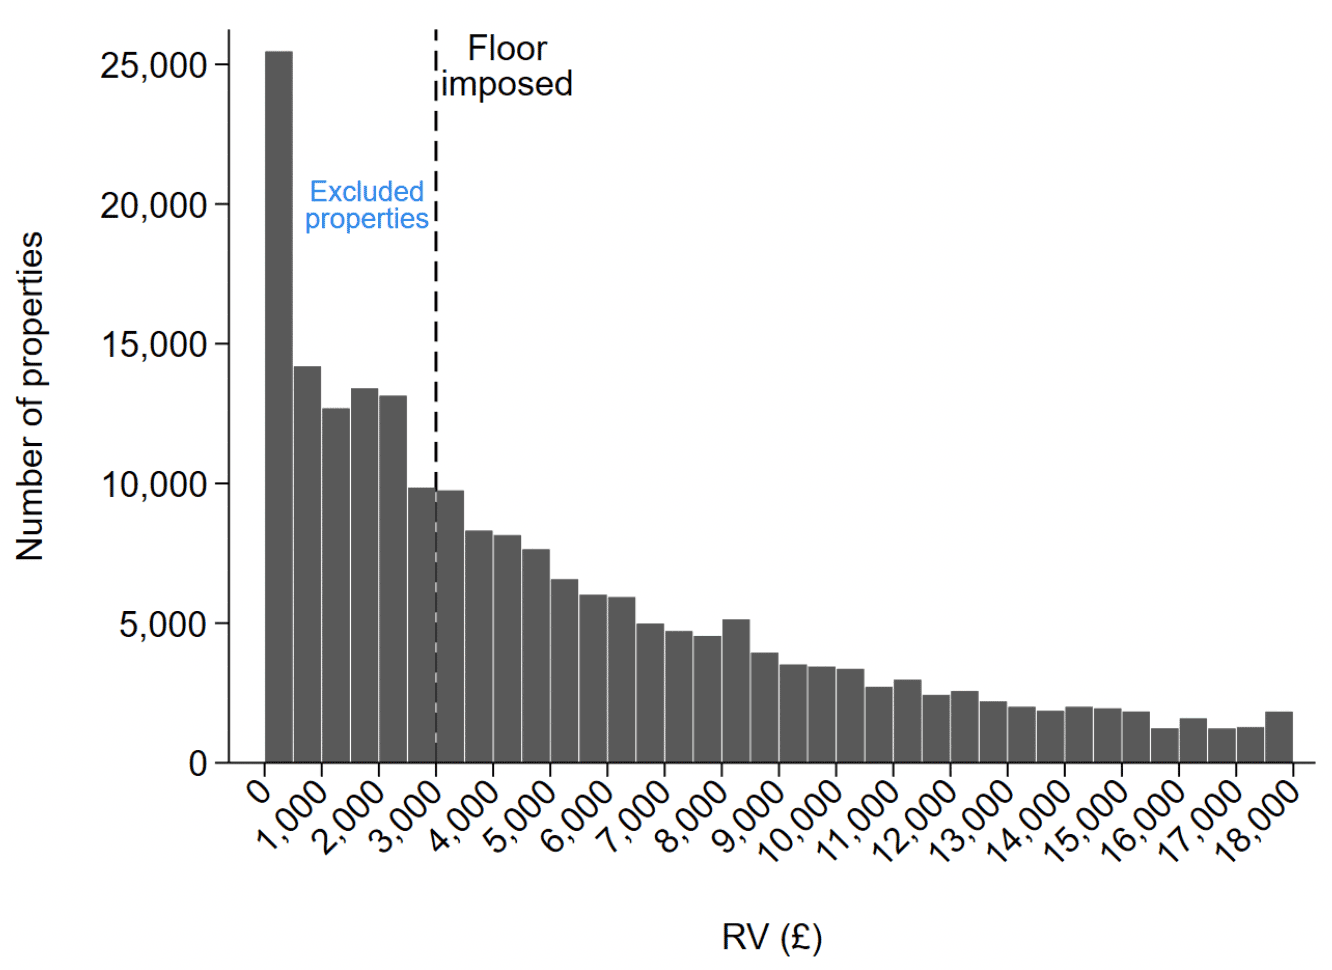 A bar chart shows the distribution of rateable value, showing that the largest RV category excluded if a lower bound is imposed is the 0-1000 RV band. 